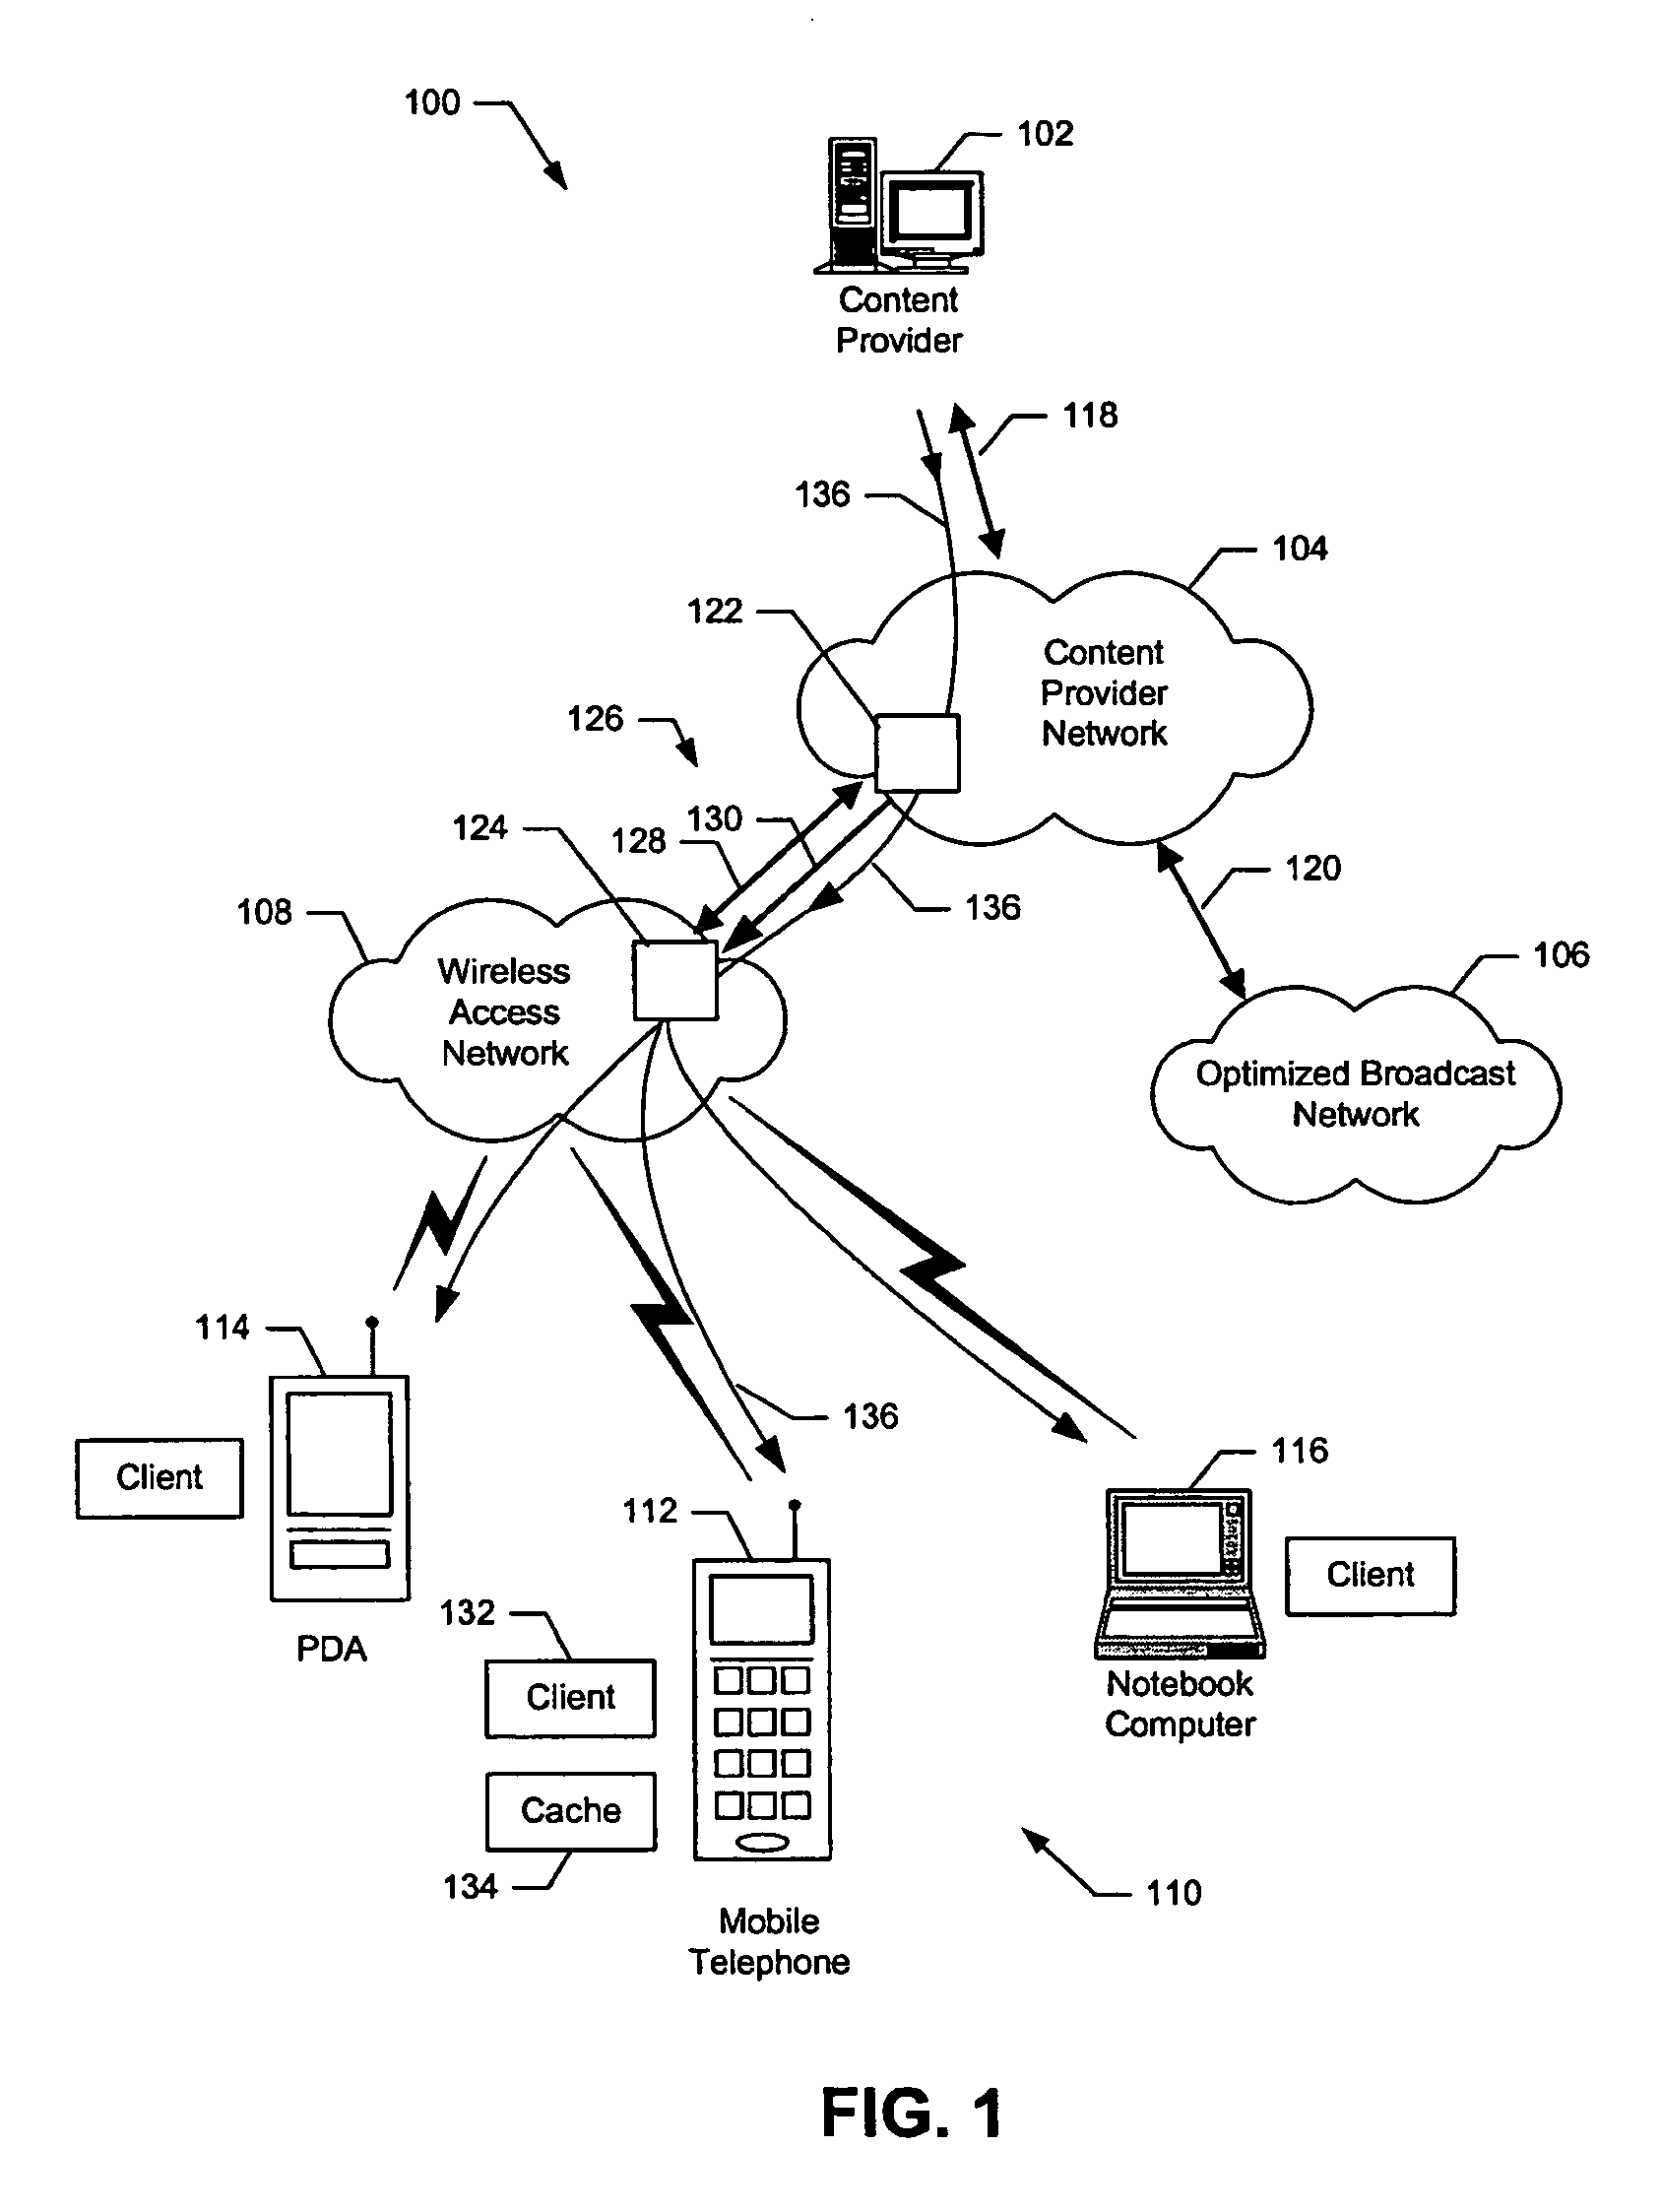 Method of improving control information acquisition latency by transmitting control information in individually decode-able packets